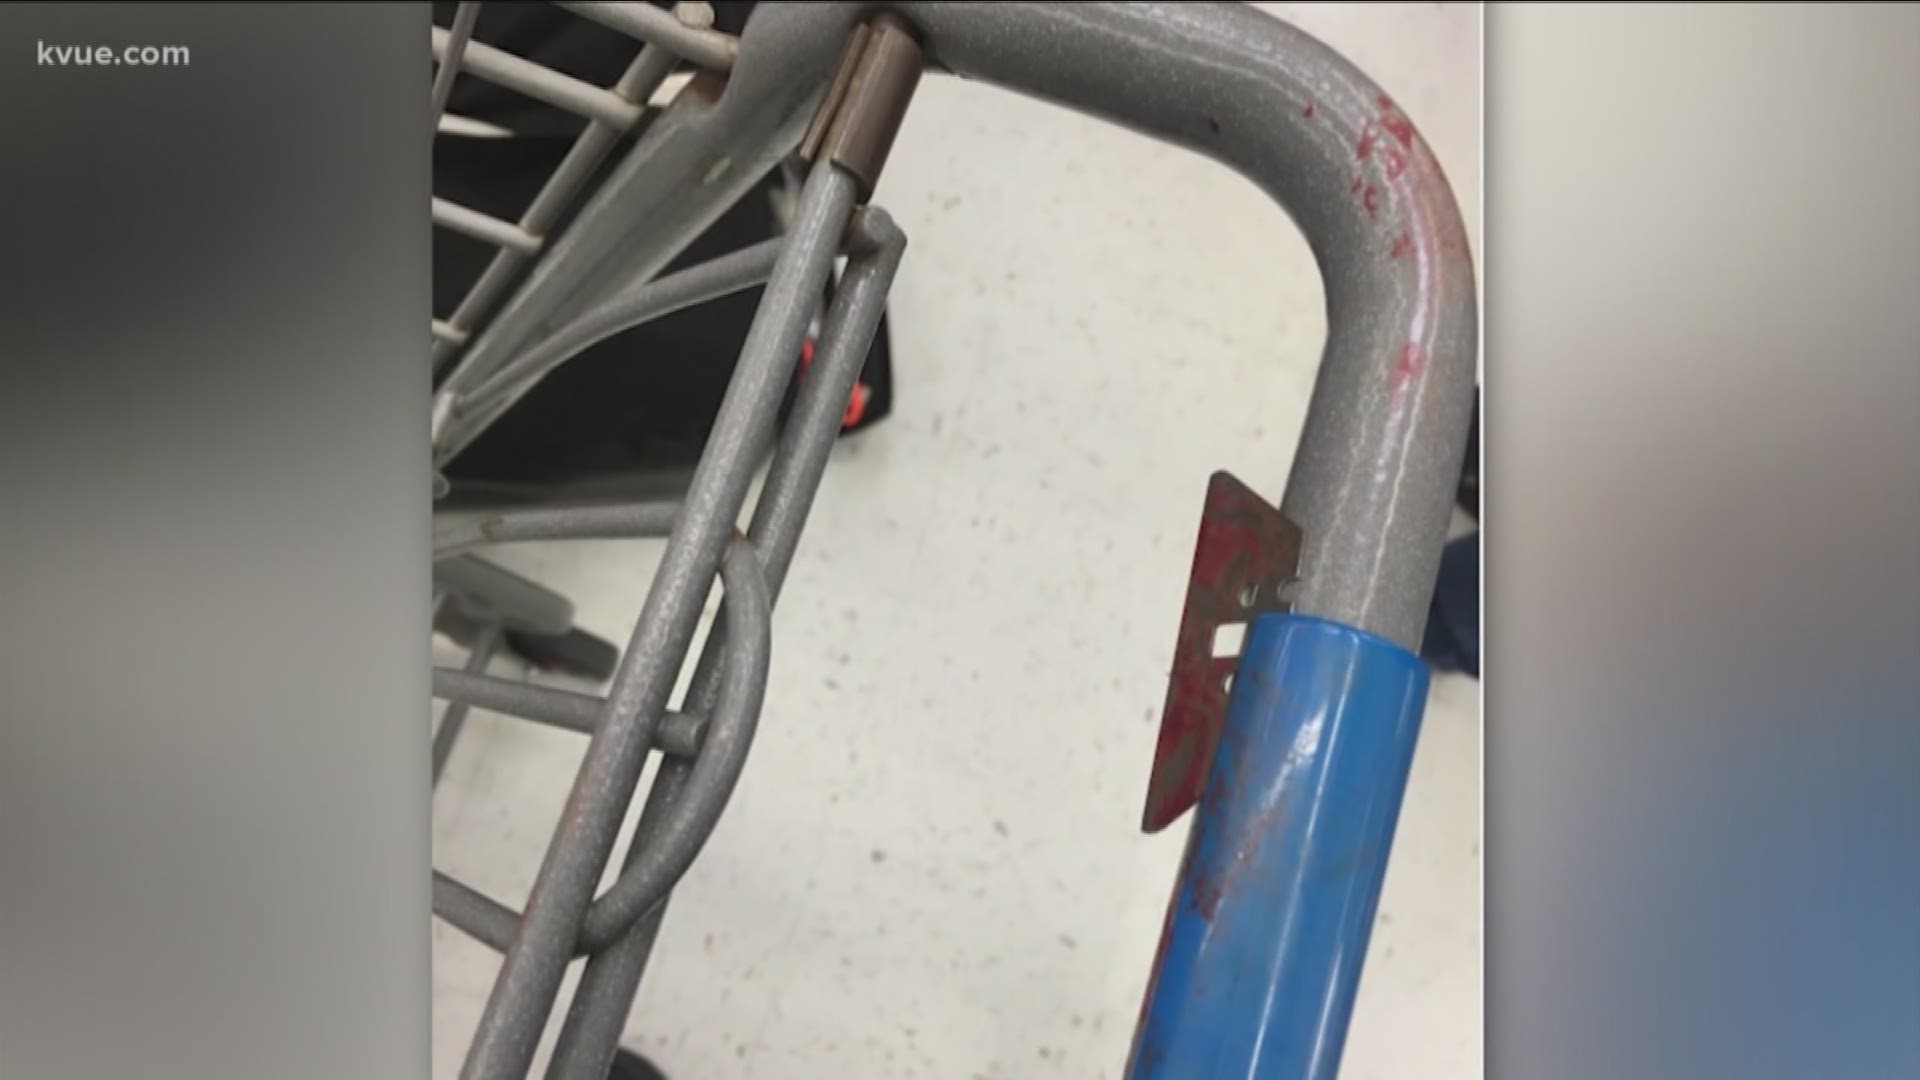 A Cedar Park woman is suing Walmart after she says she was cut by a razor blade lodged in her shopping cart.